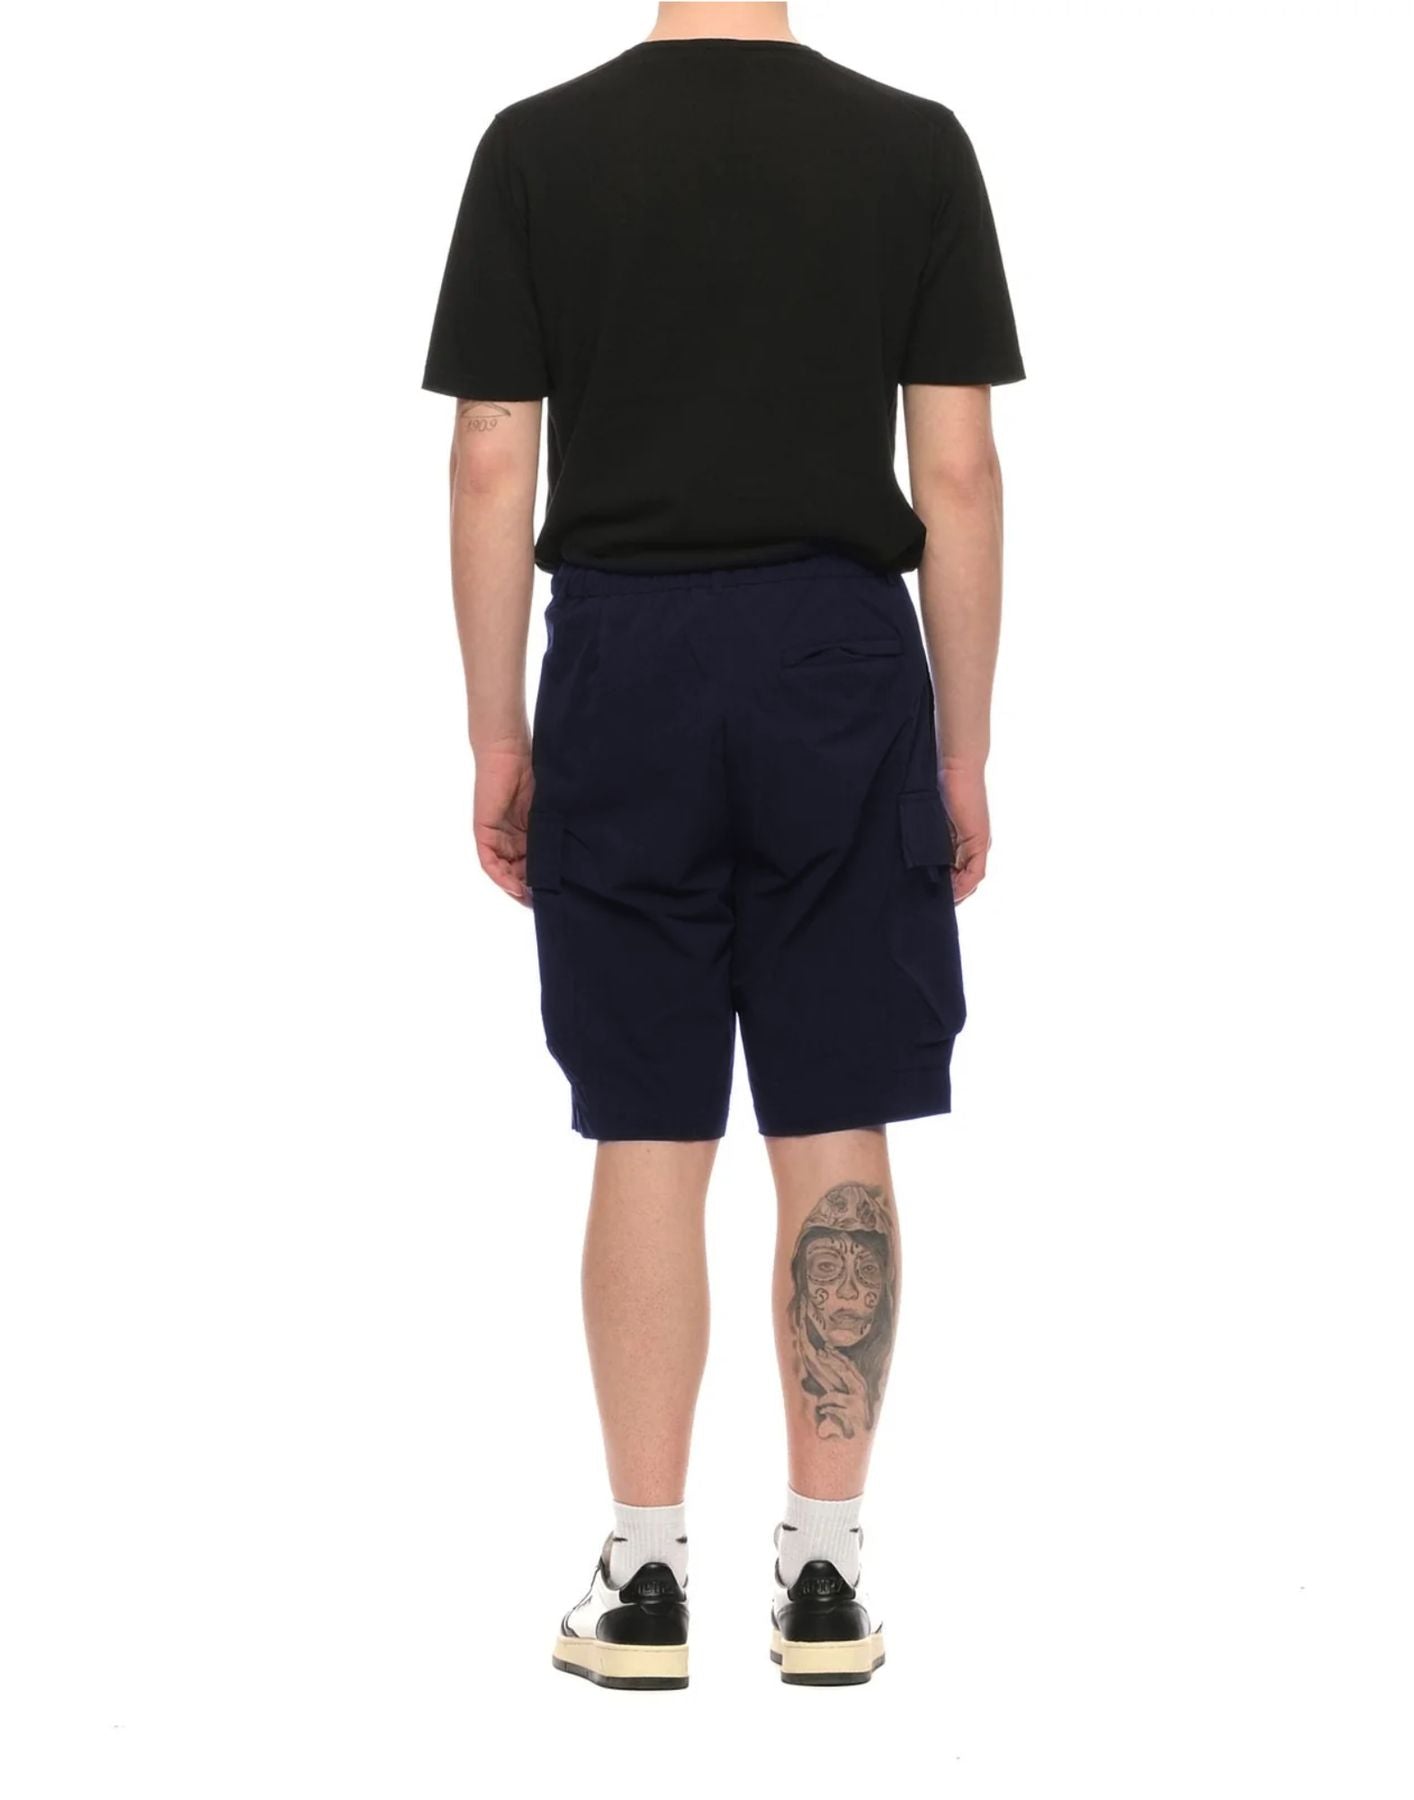 Shorts man eotm216ag42 navy outhere